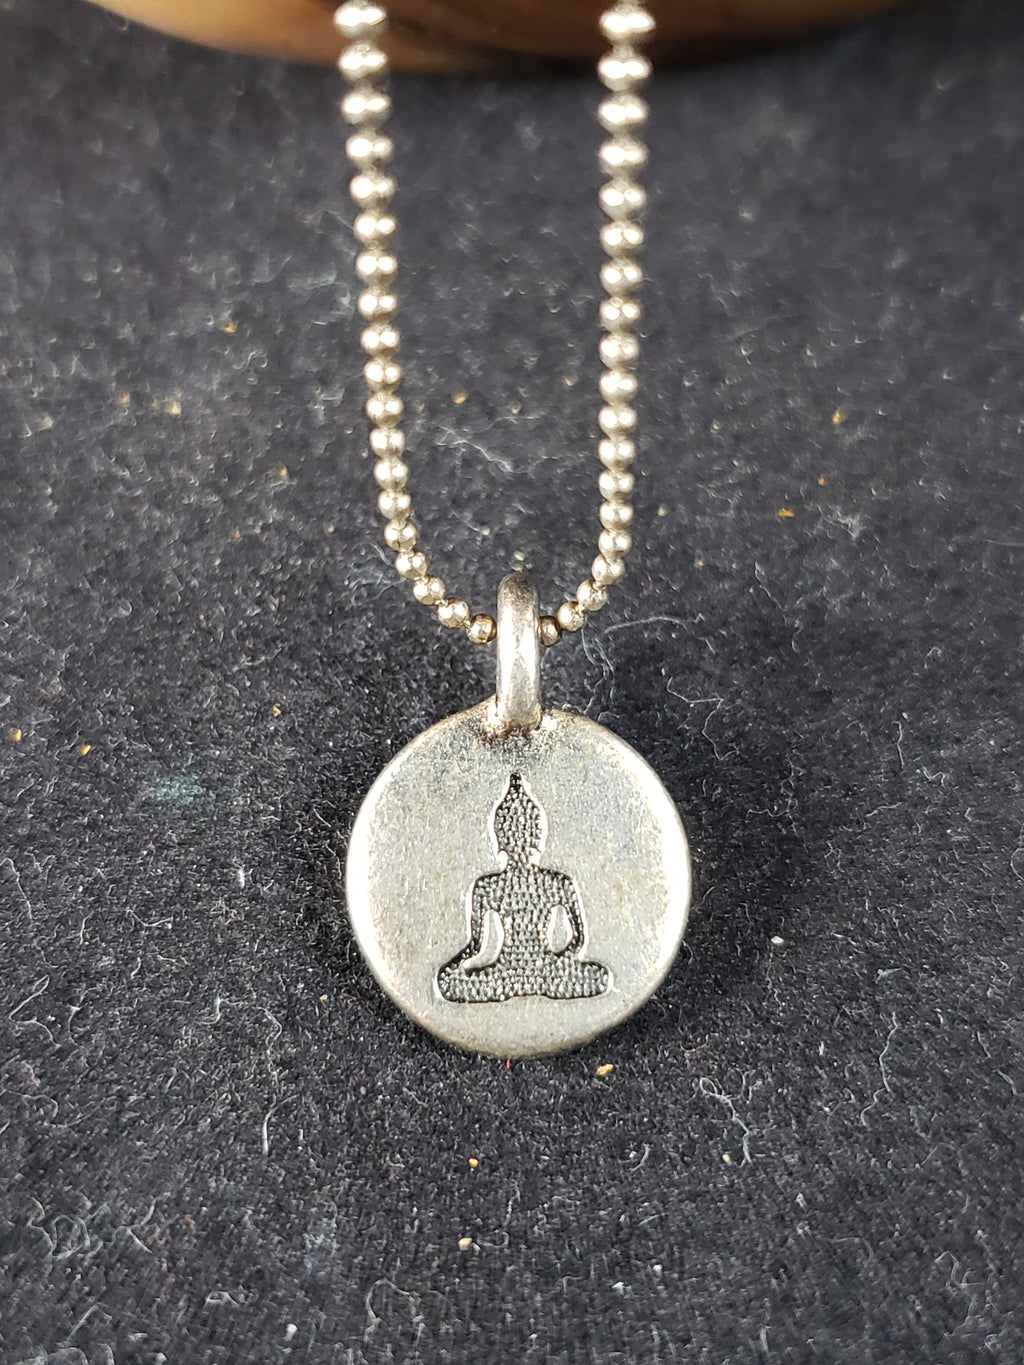 Tiny Pewter or Copper Buddha